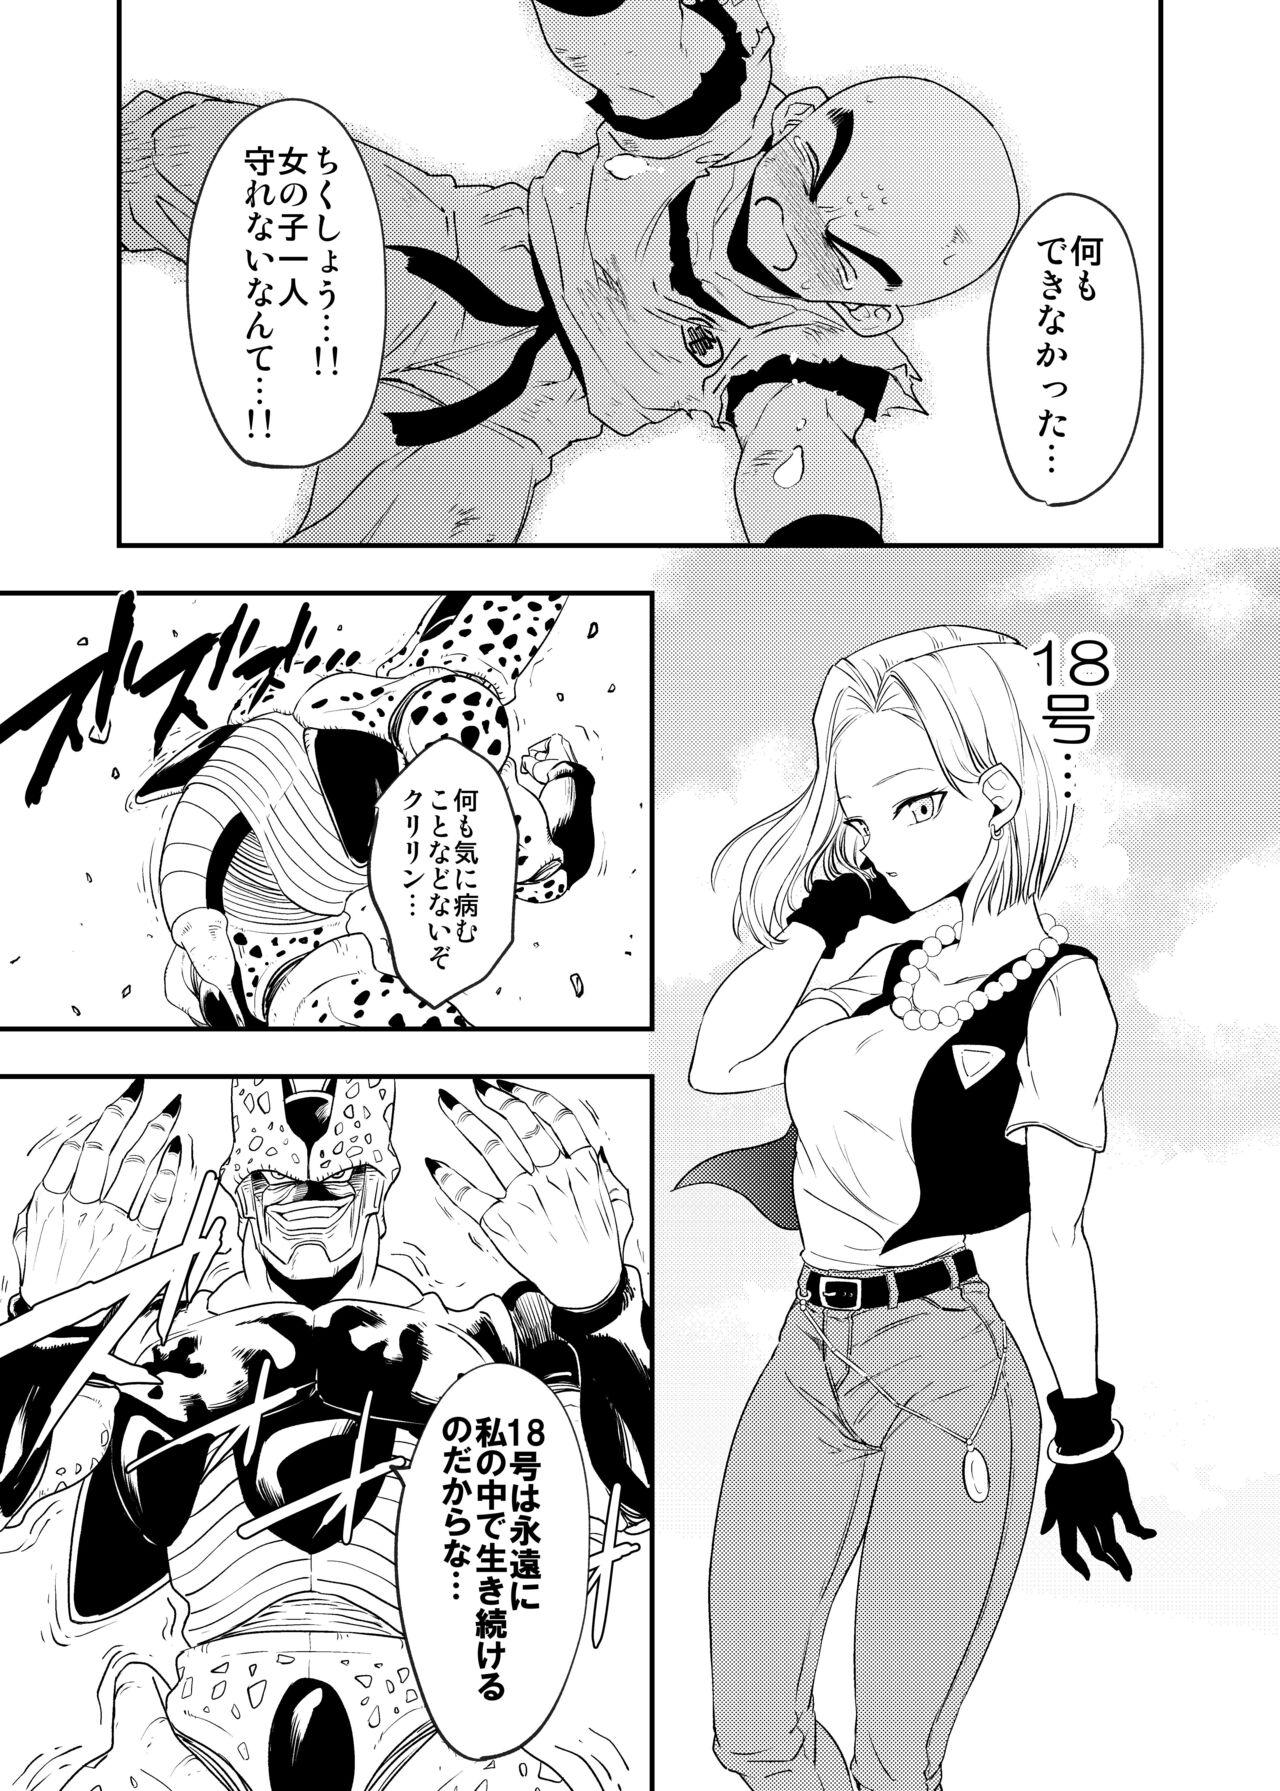 Office Fuck Cell no esa sucking love - Dragon ball z Woman - Page 48